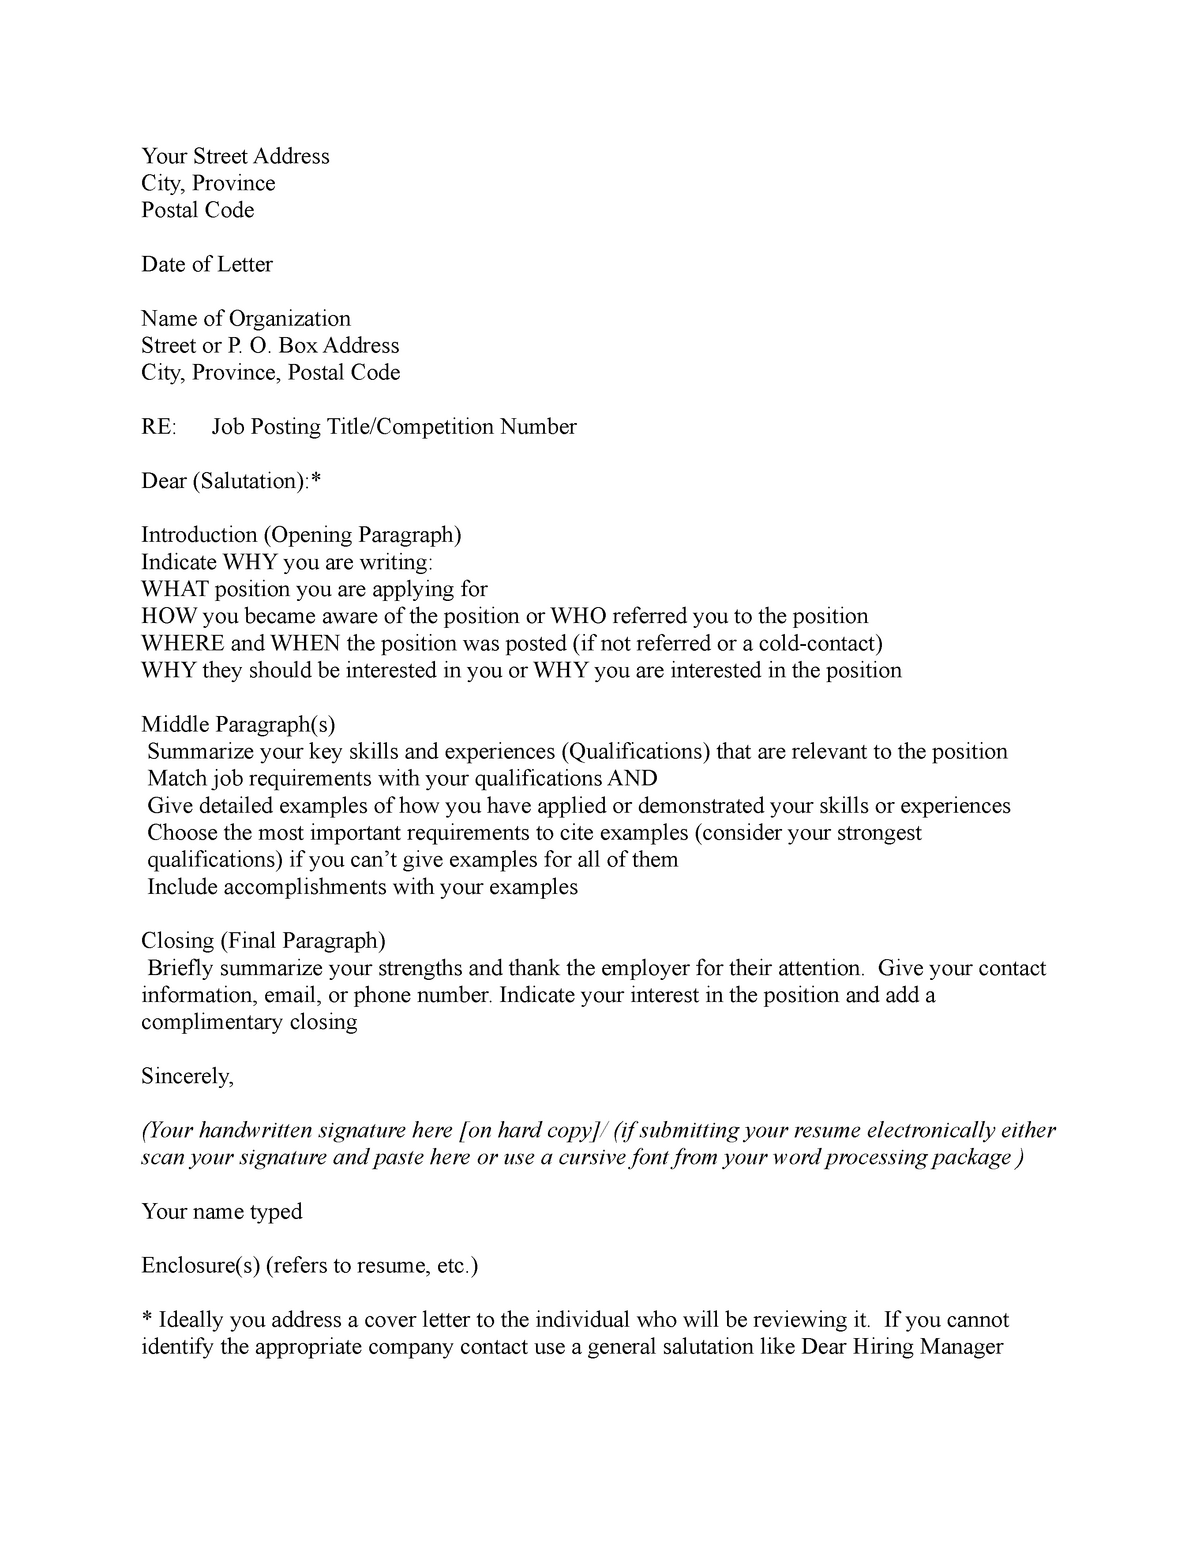 Cover Letter Salutation Examples from d20ohkaloyme4g.cloudfront.net